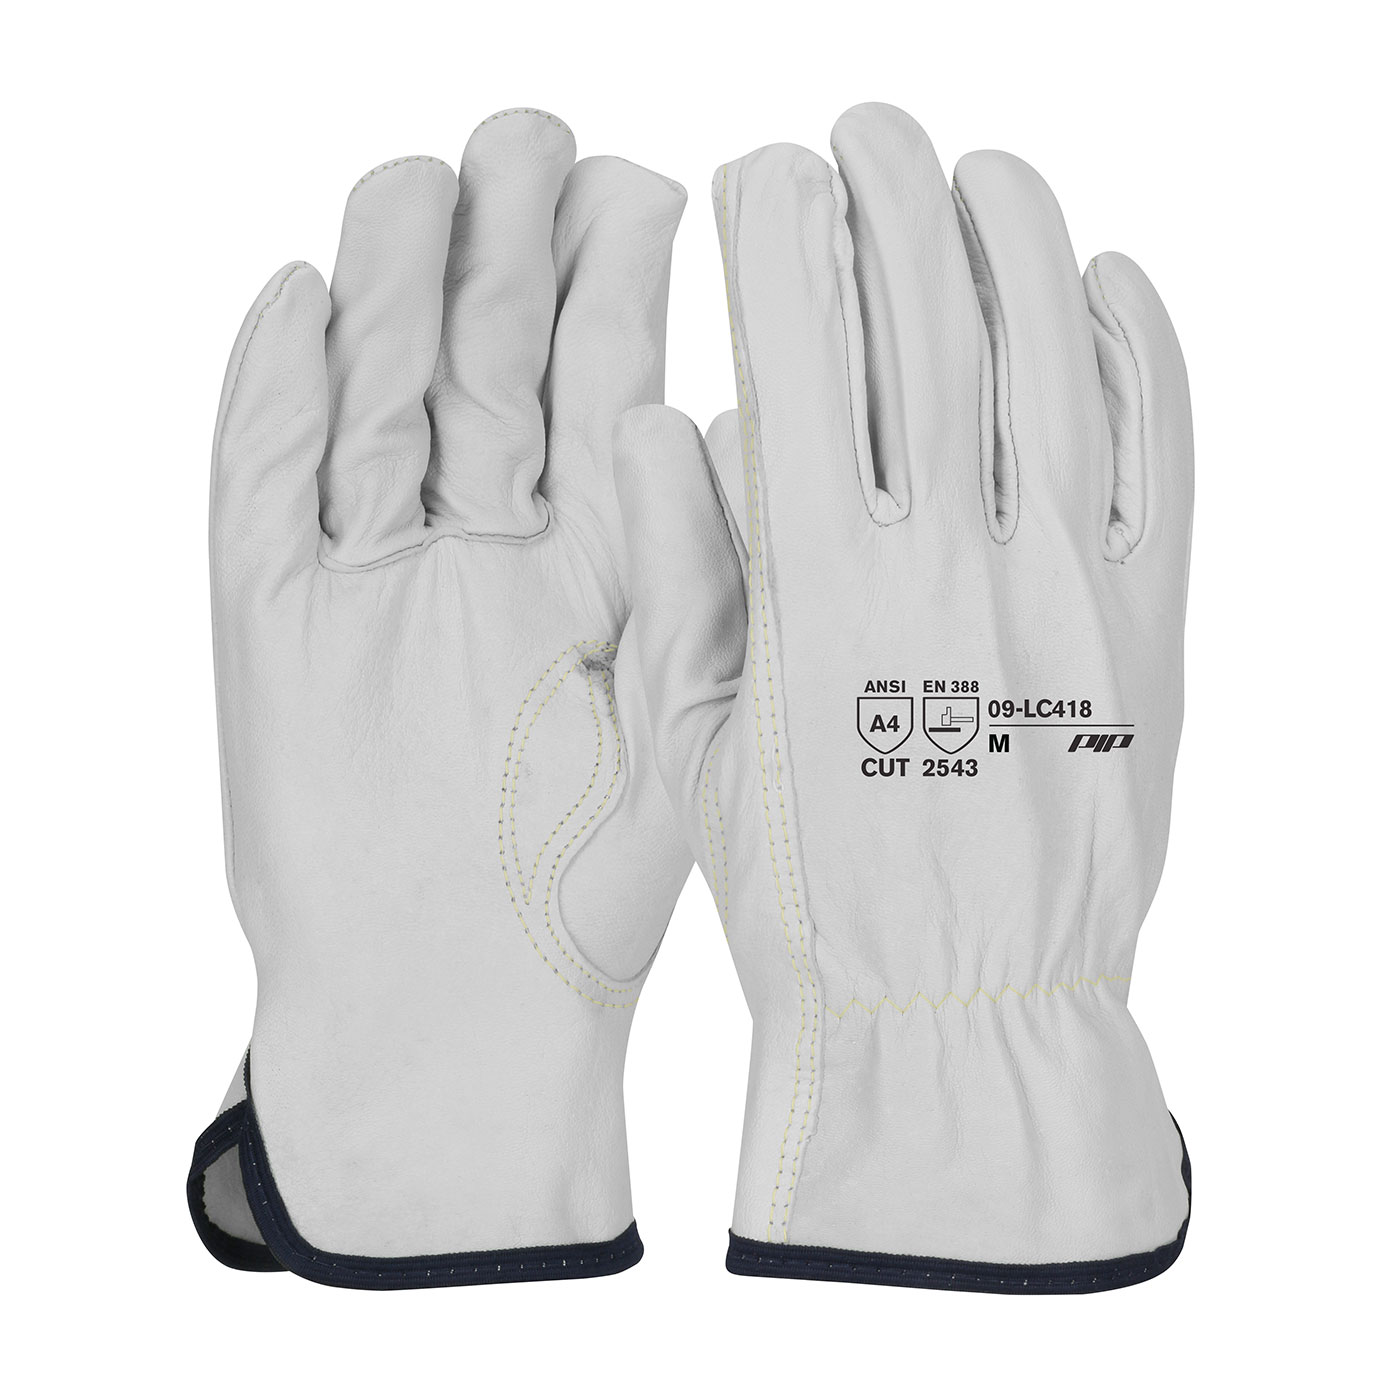 PIP 09-LC418 Premium Top Grain Goatskin Leather Drivers Glove with Aramid Blended Lining and Kevlar Stitching